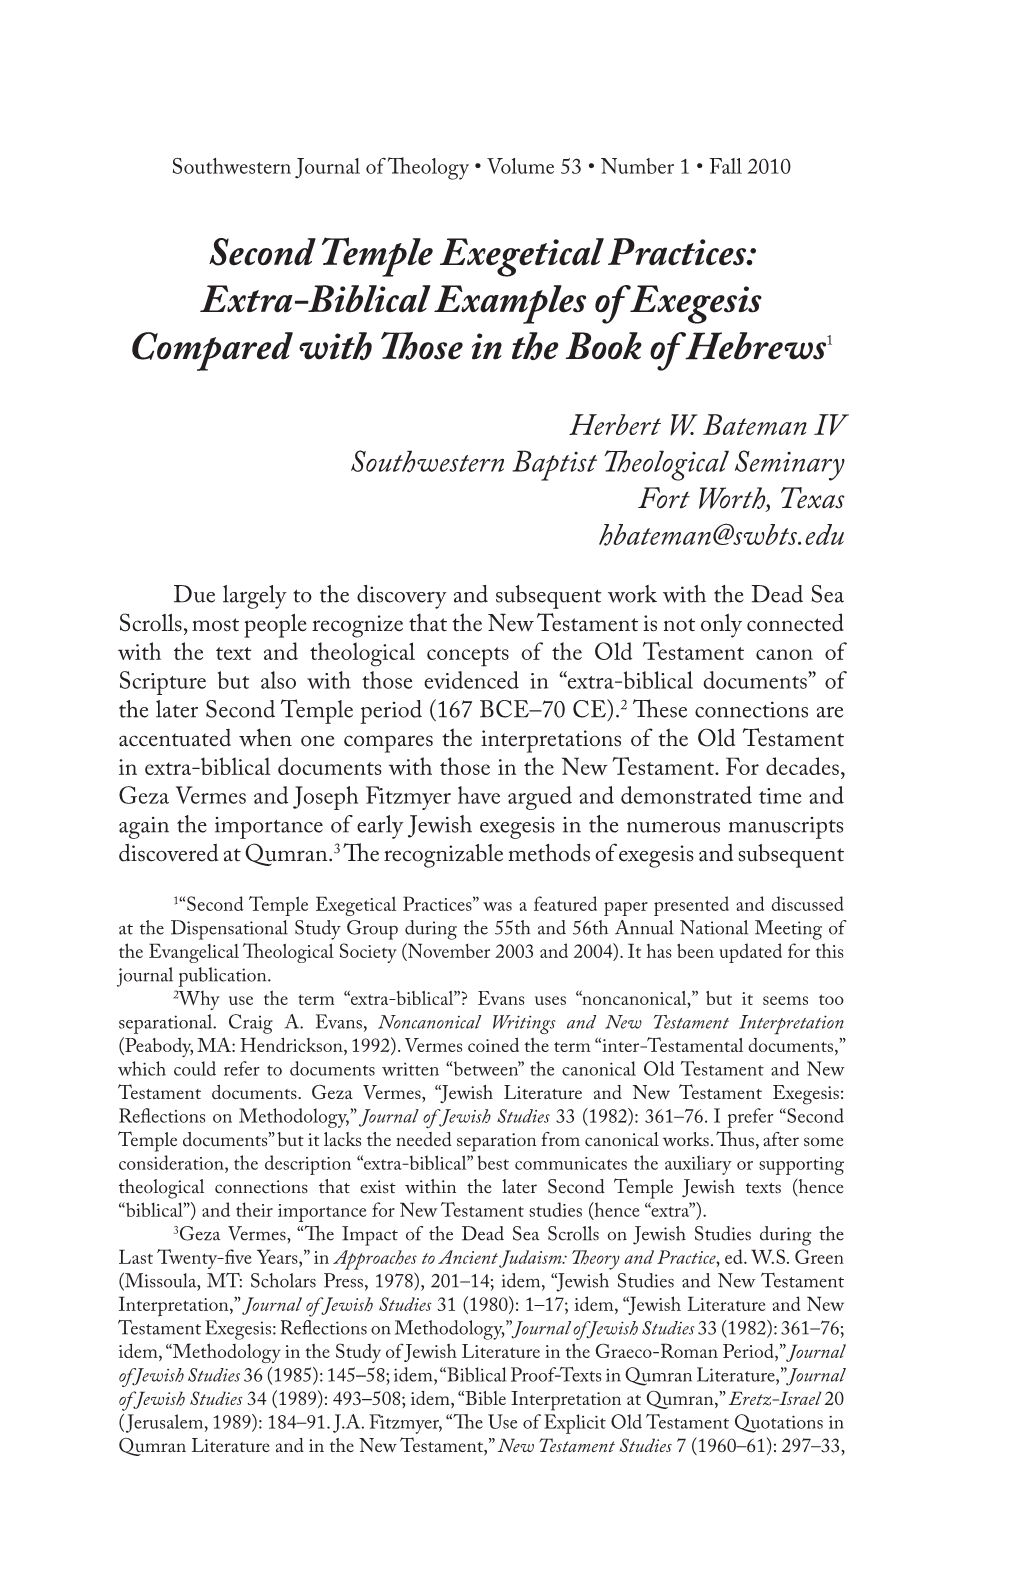 Second Temple Exegetical Practices: Extra-Biblical Examples of Exegesis Compared with Those in the Book of Hebrews1